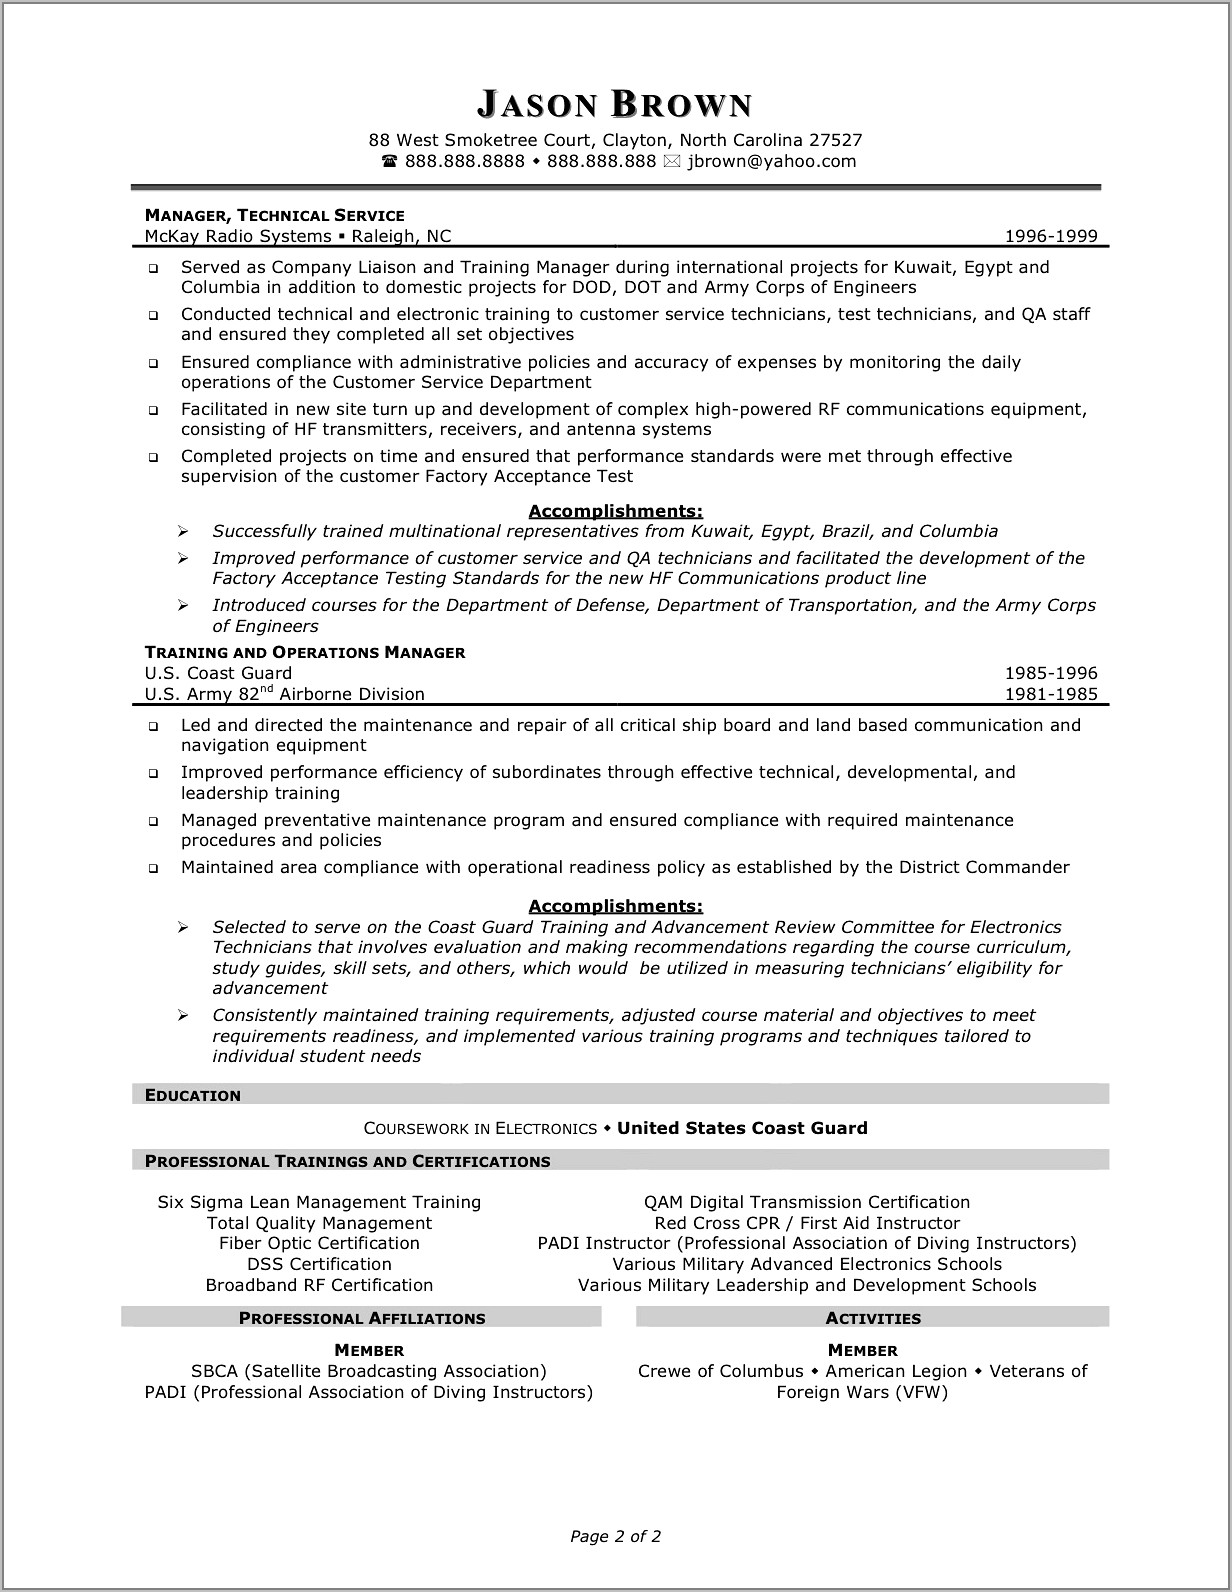 Free Resume Templates For Customer Service Jobs